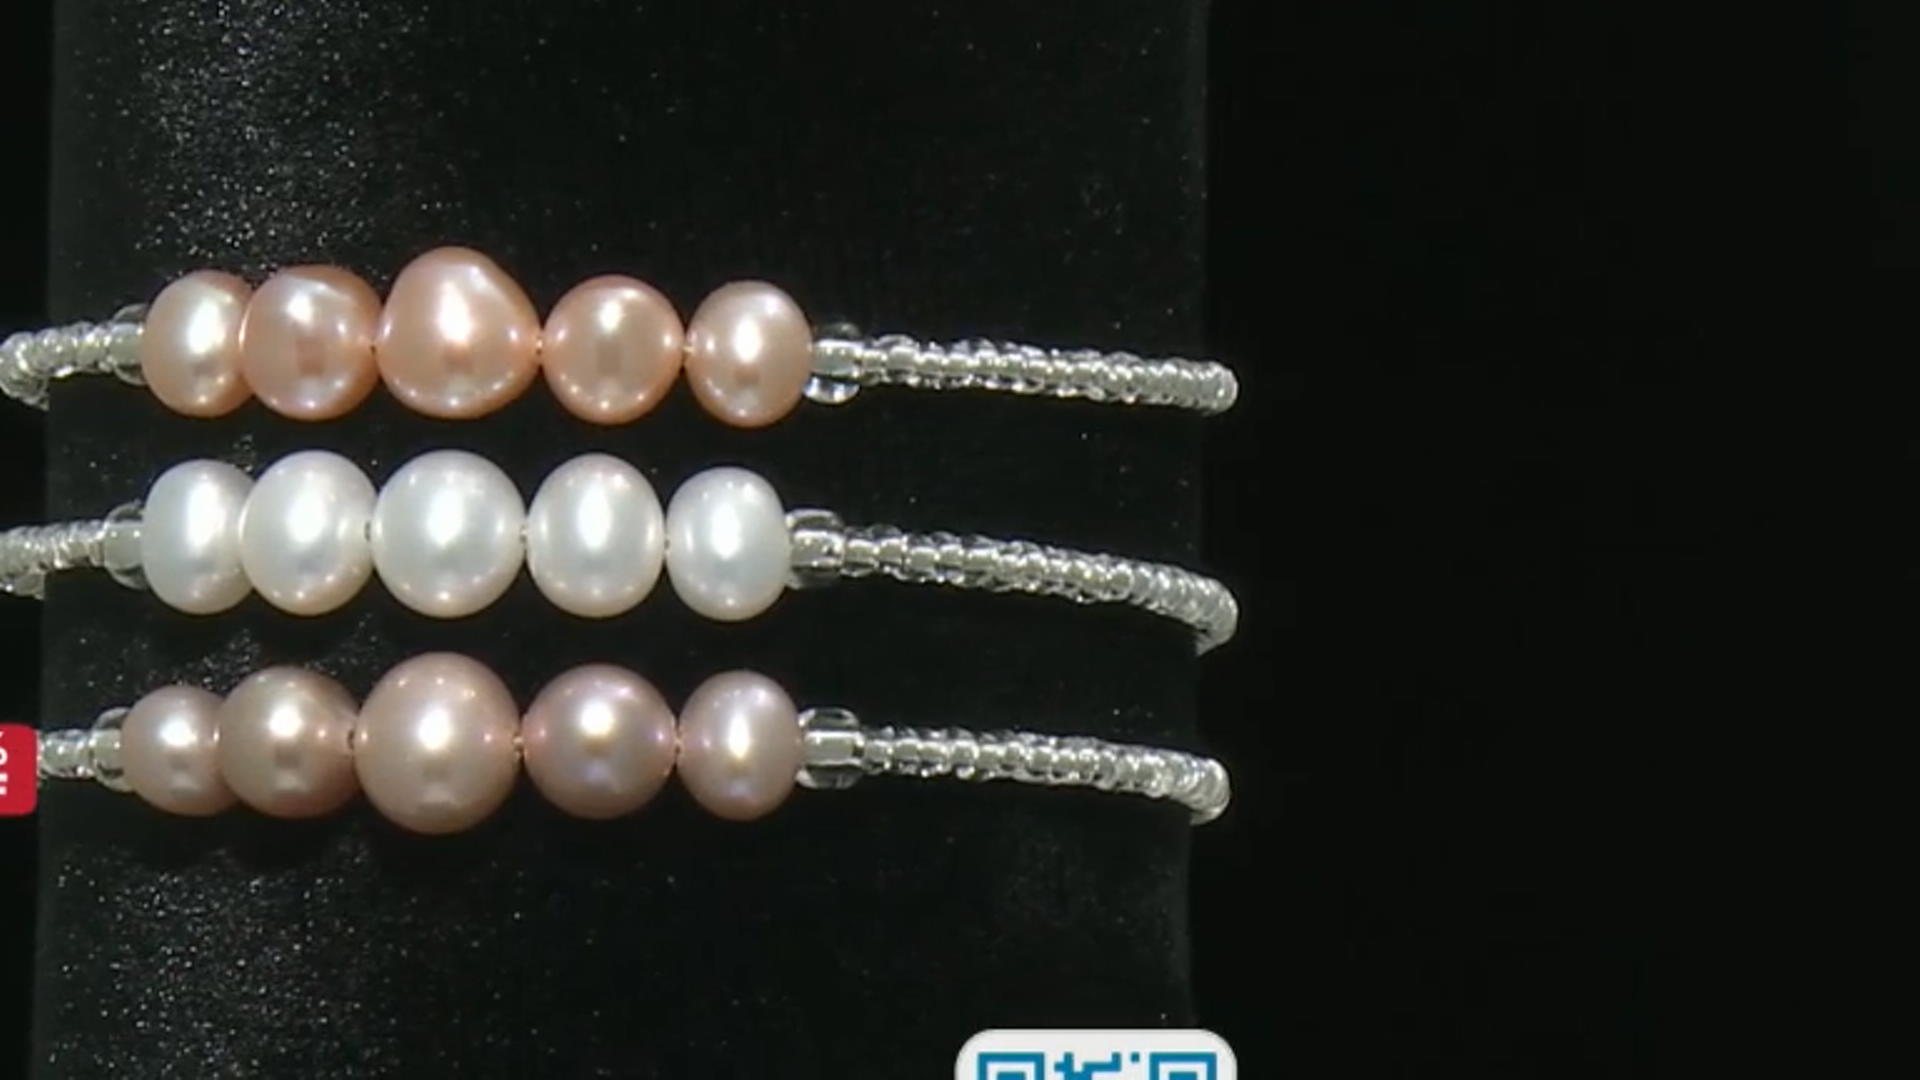 Light Multi-Color Cultured Freshwater Pearl & Glass Bead & Sterling Silver Bangle Set Video Thumbnail